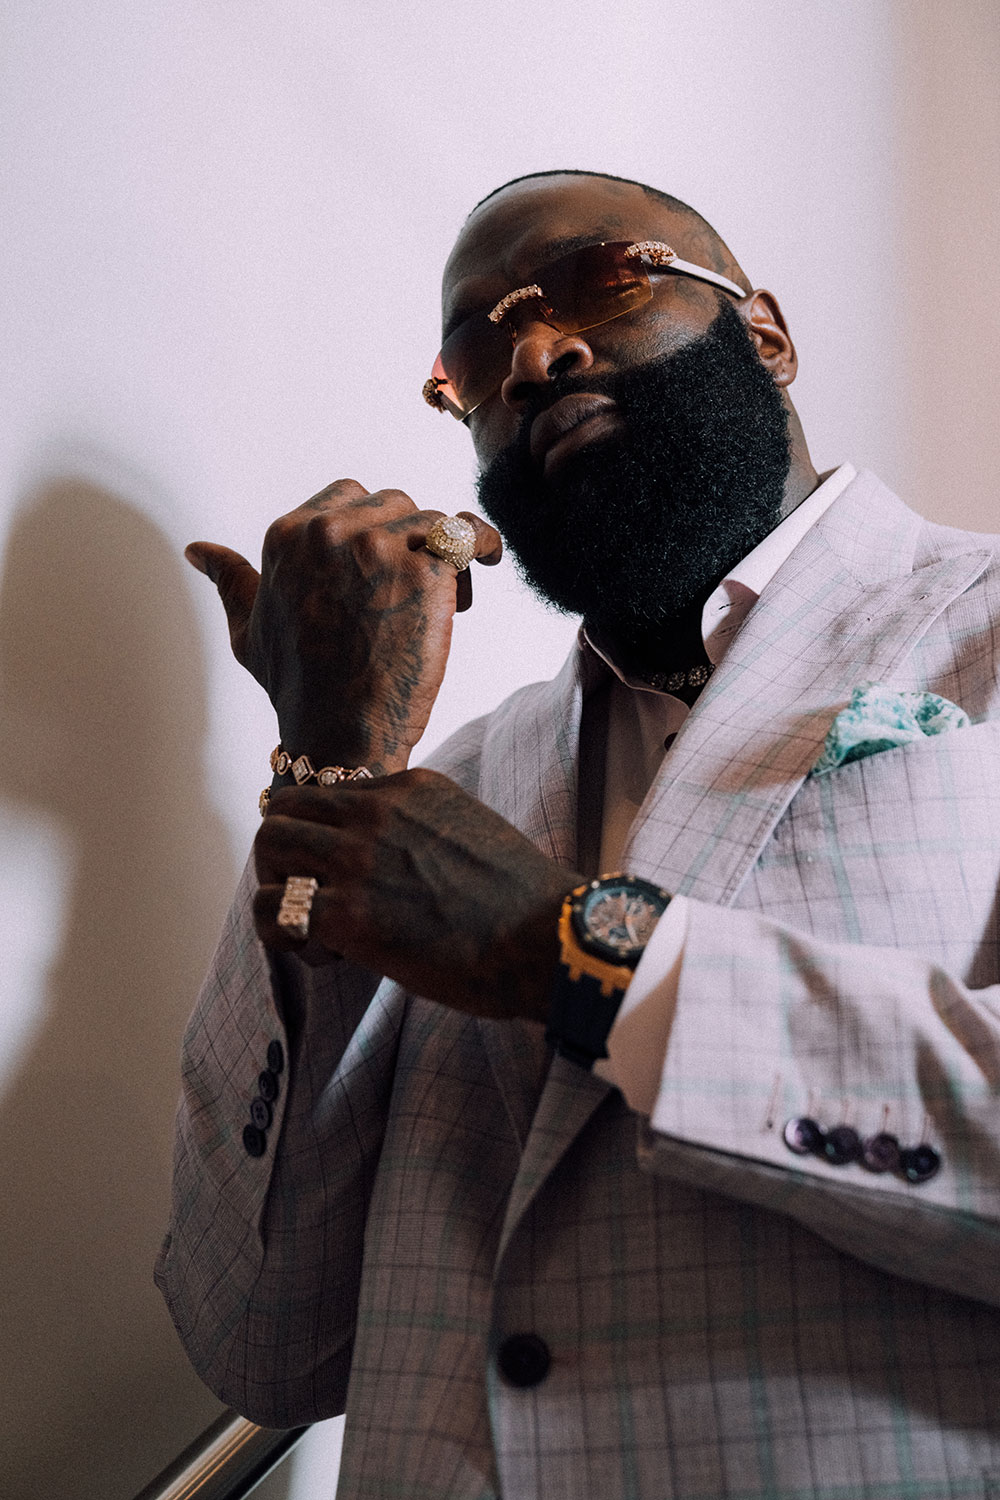 Review: Rick Ross' 'Richer Than I've Ever Been